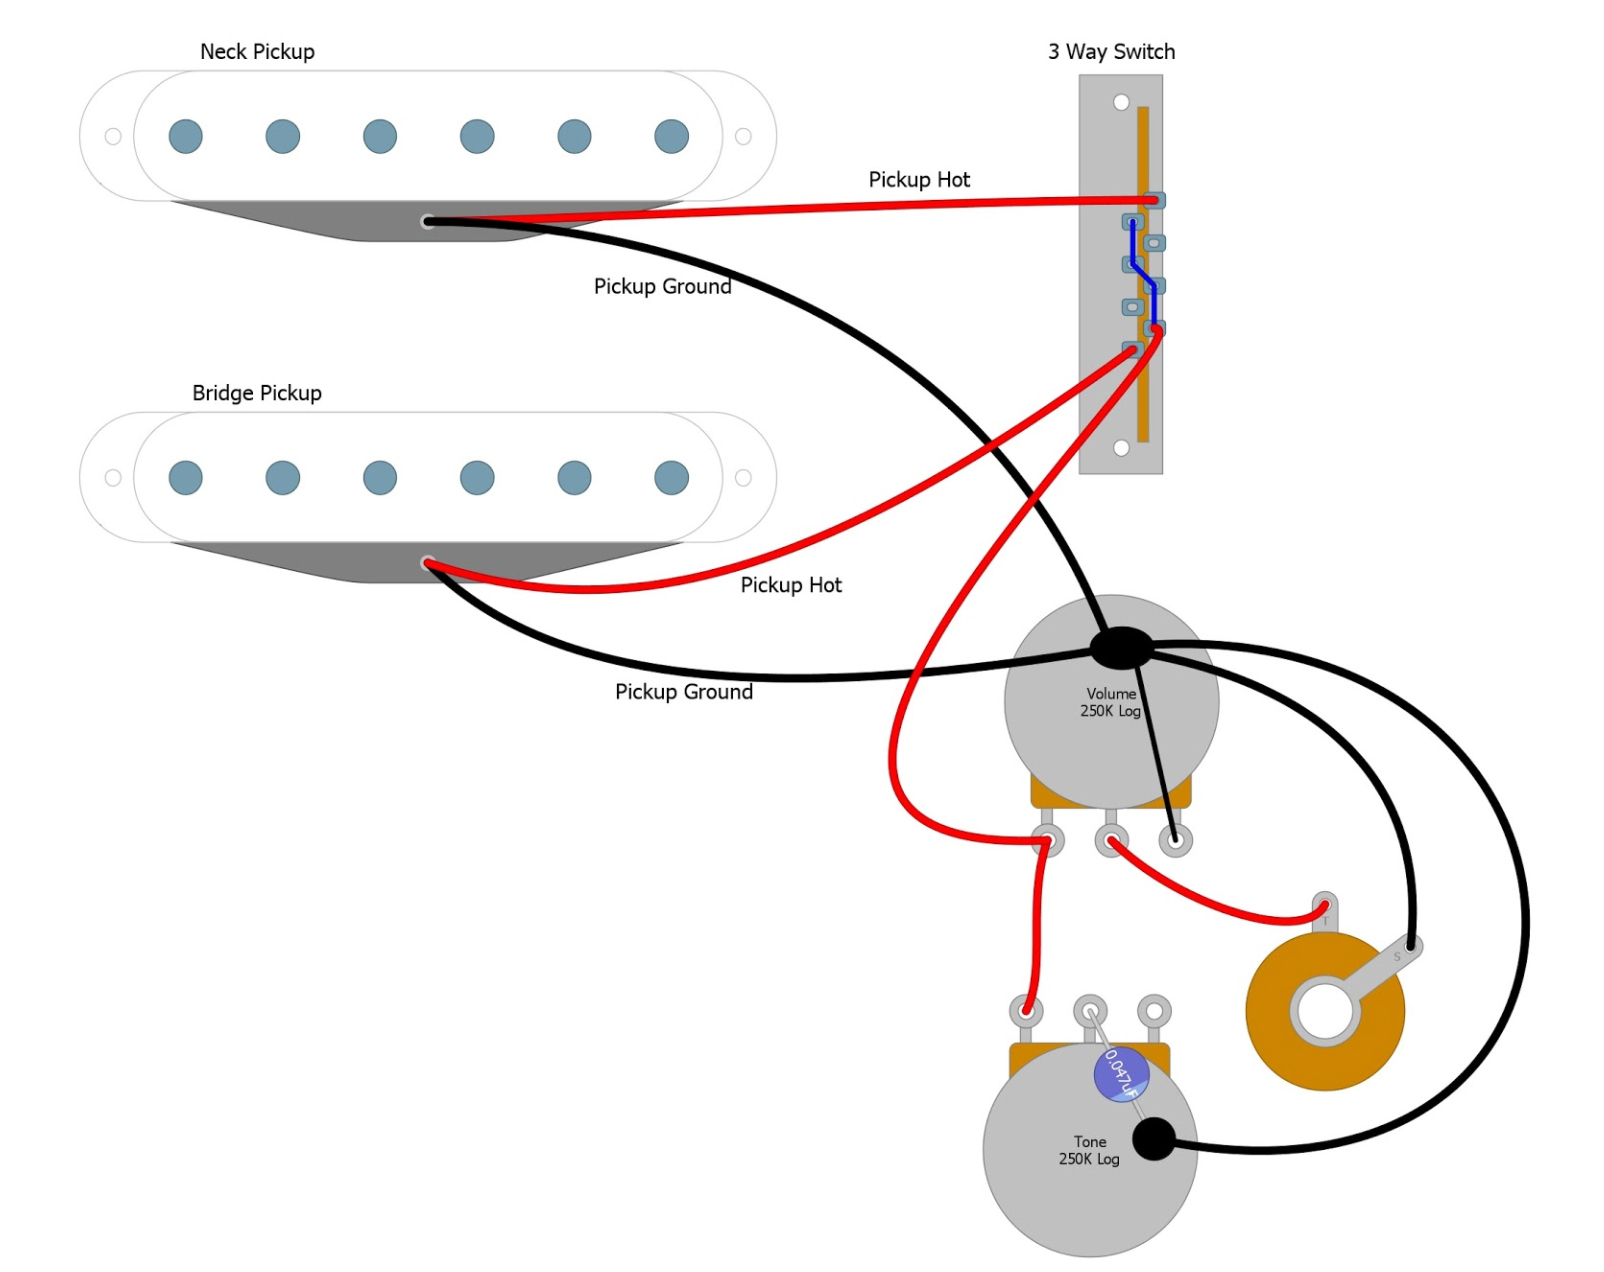 Wiring A Three Way Switch Diagram from humbuckersoup.com